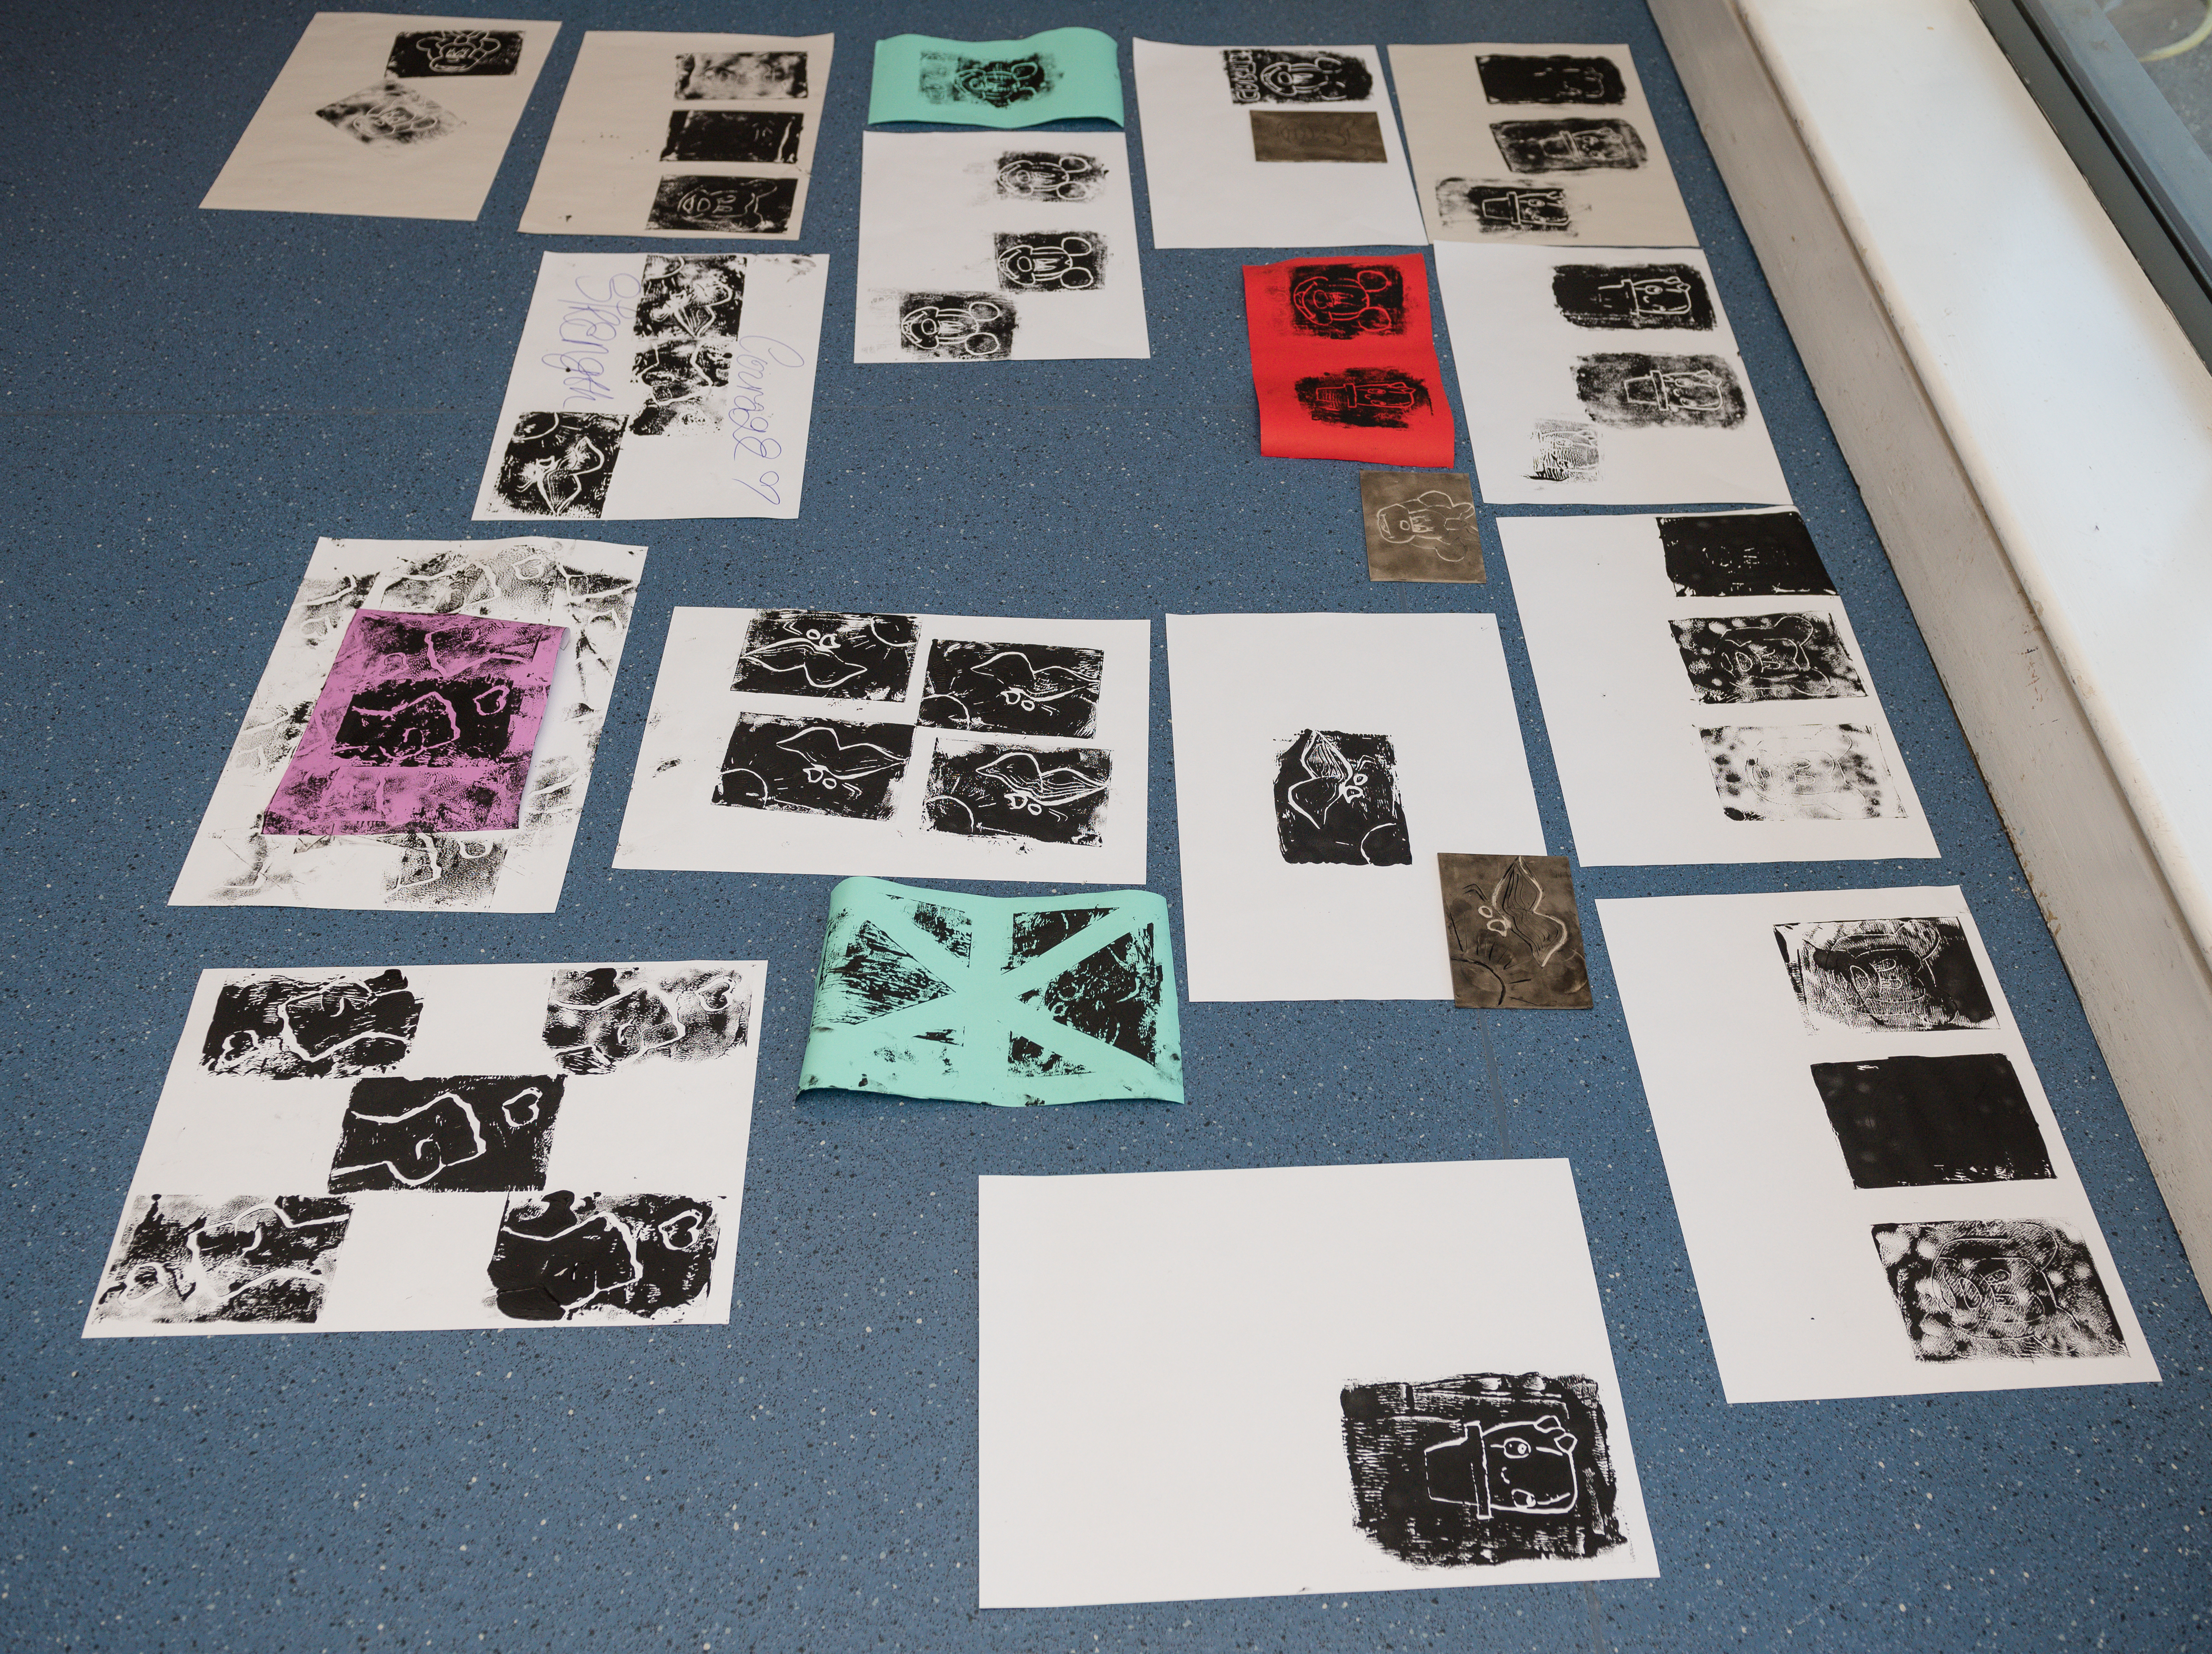 Images laid out on the floor of a studio space